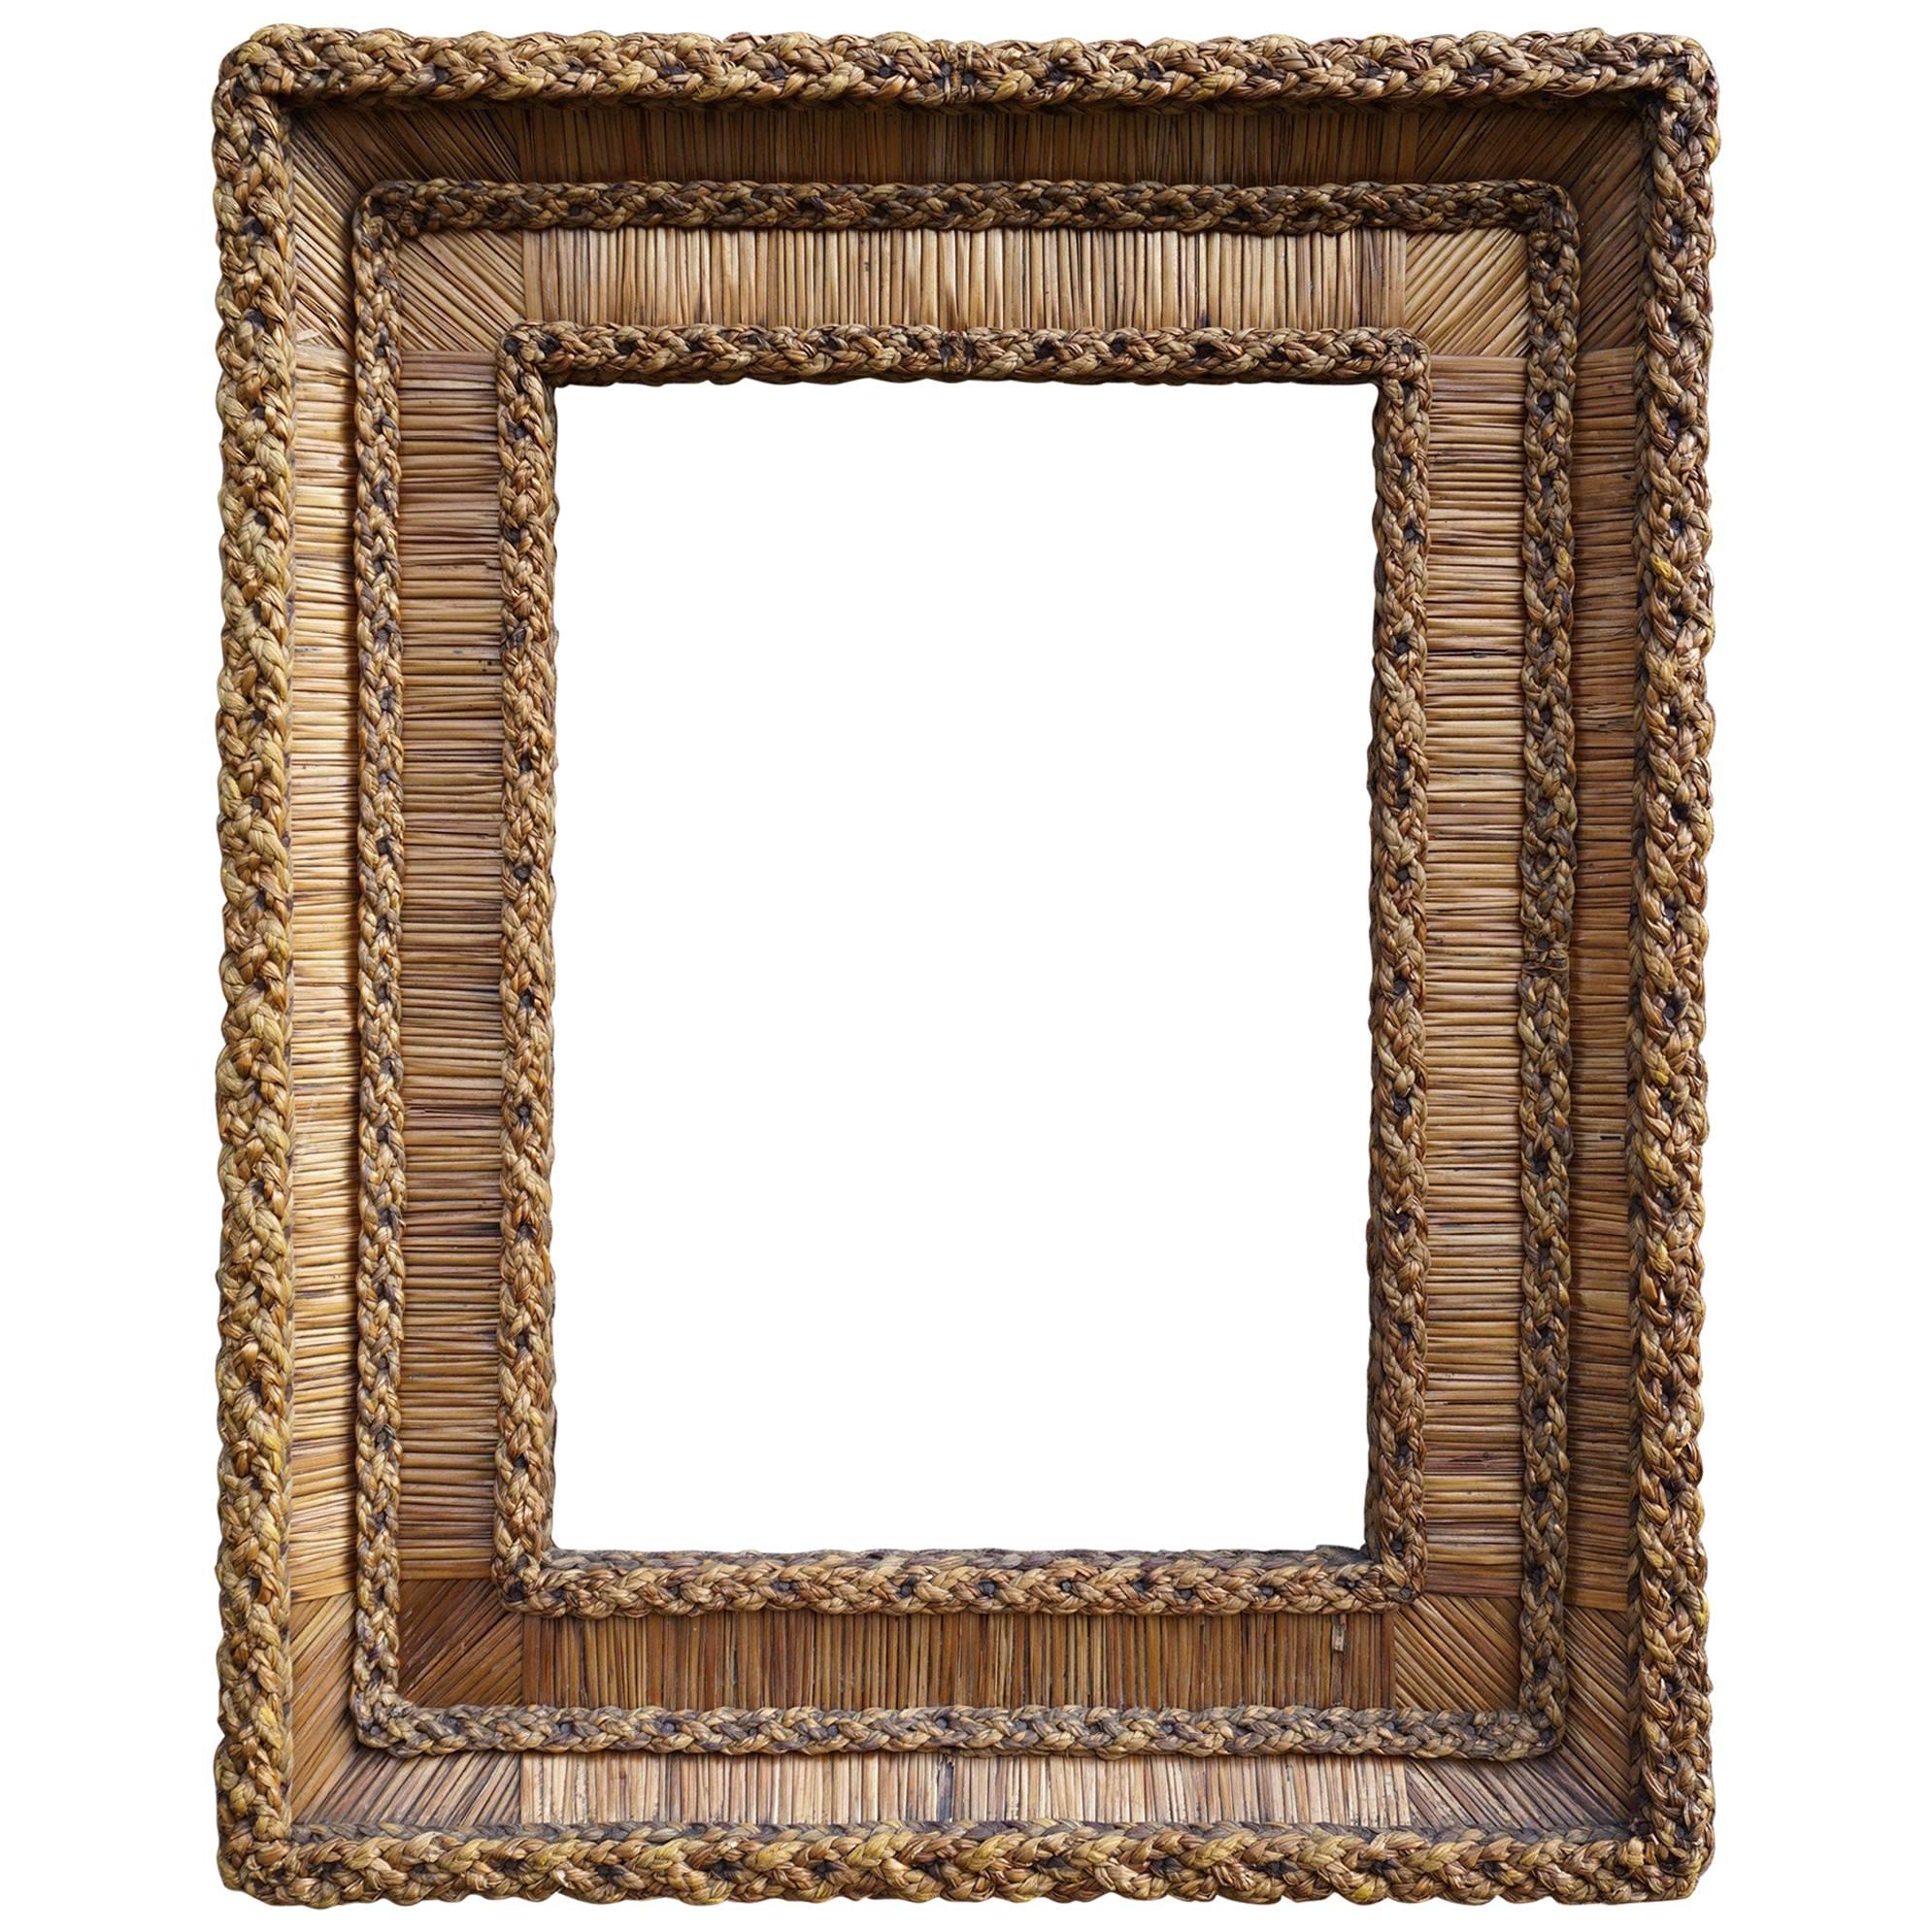 Vintage Hand-Woven Straw on Wood, Stylishly Organic Picture or Mirror Frame 